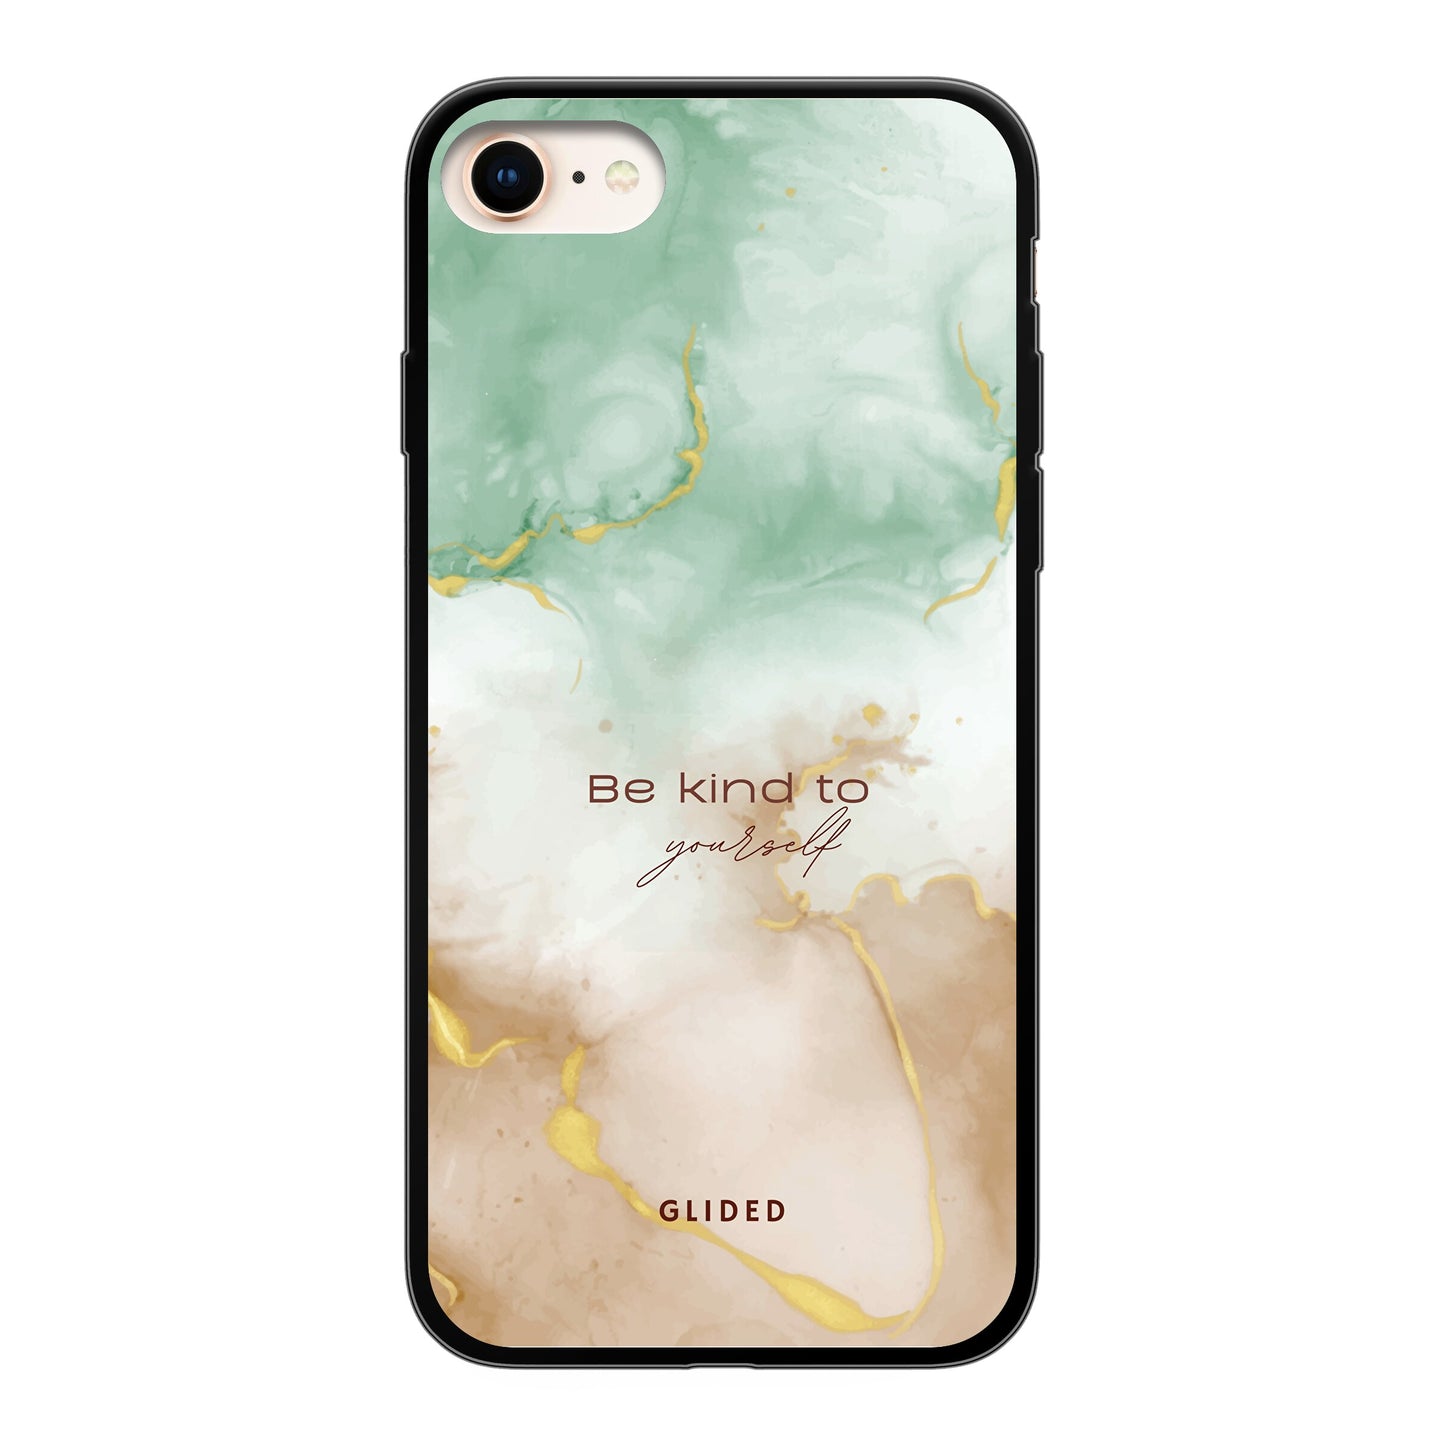 Kind to yourself - iPhone 7 Handyhülle Soft case